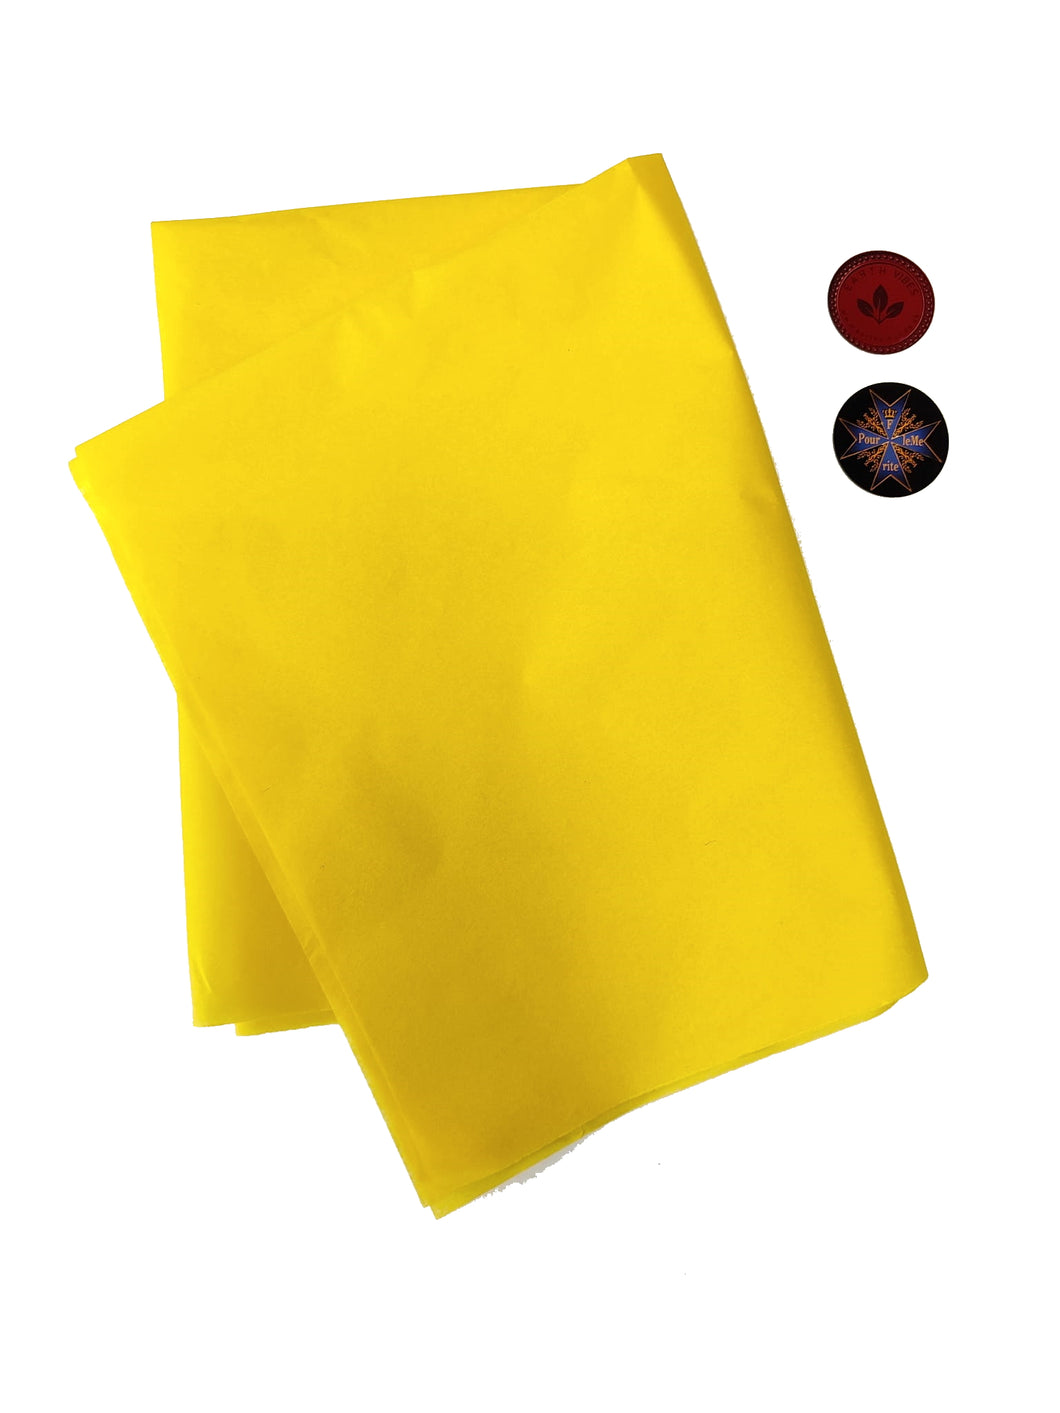 Sunfire Yellow Tissue Covering